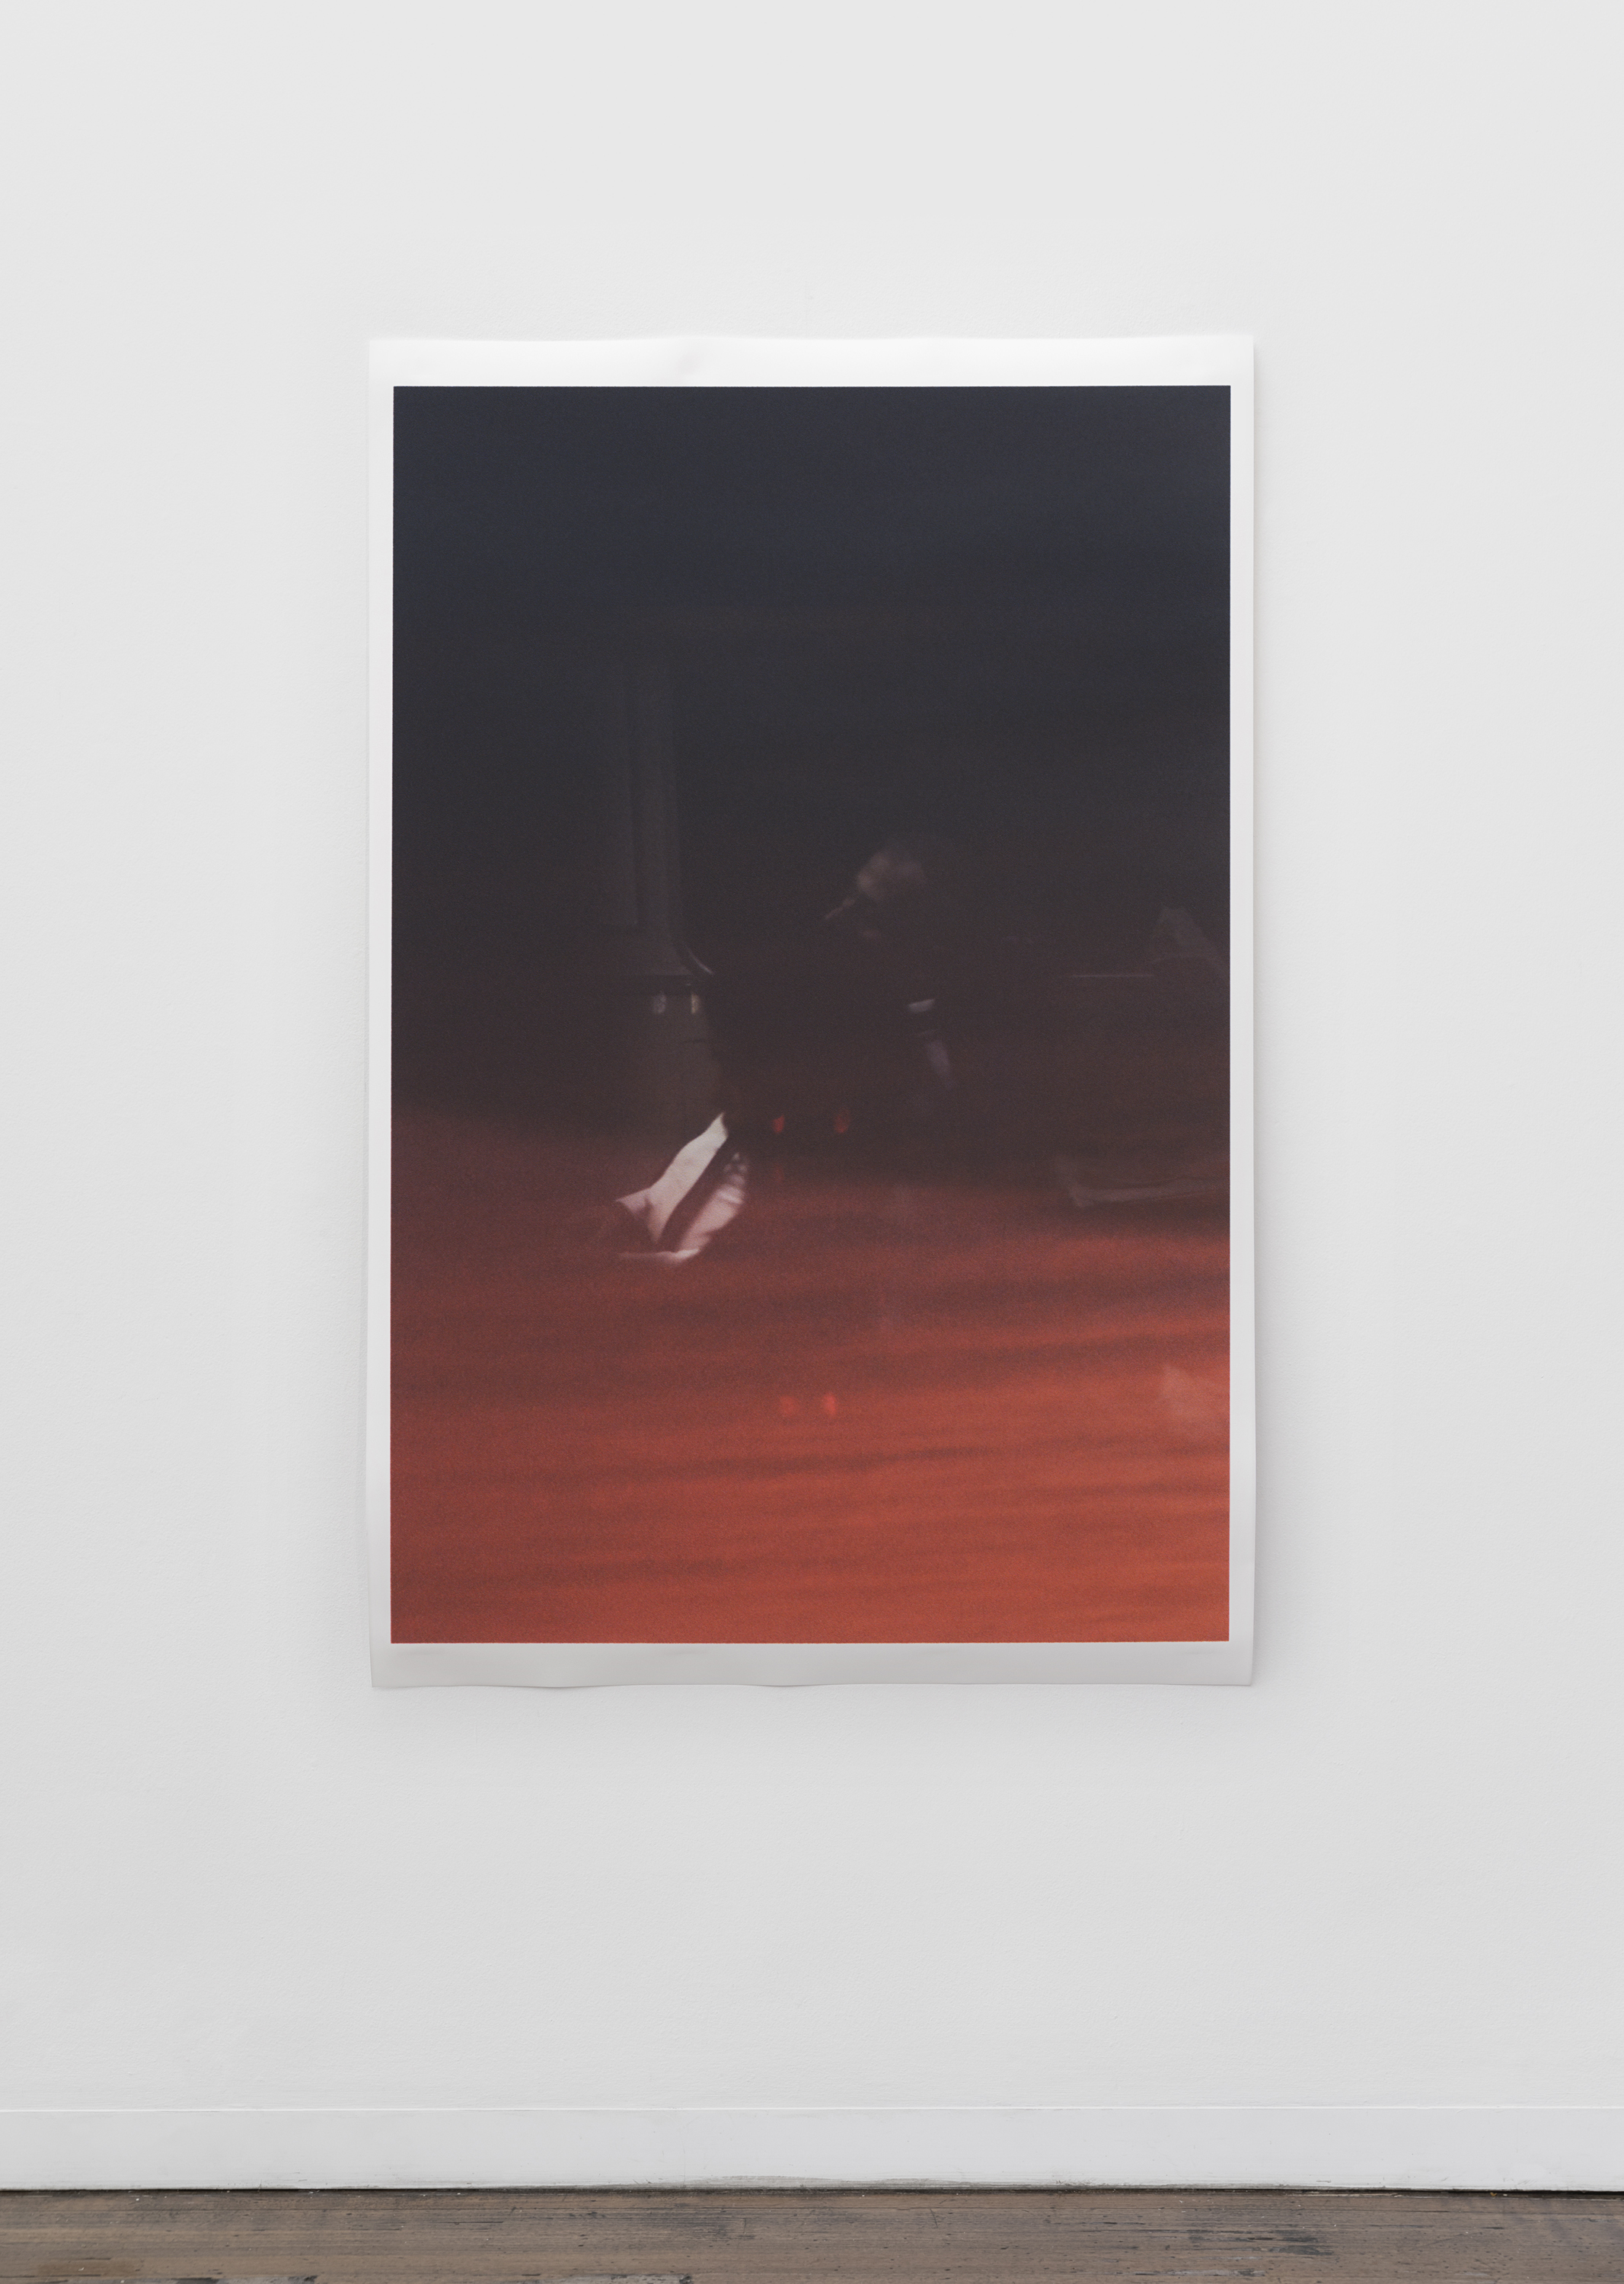   Untitled (figure, glass, sky) , pigment print on paper, sheet: 168 × 110 cm (66 1/8 × 43 1/4 in), framed: 178.9 × 120.2 cm (70 1/2 × 47 3/8 in), 2019  Installation view of “the sacredness of something” at Arc One Gallery, Melbourne (2019) 